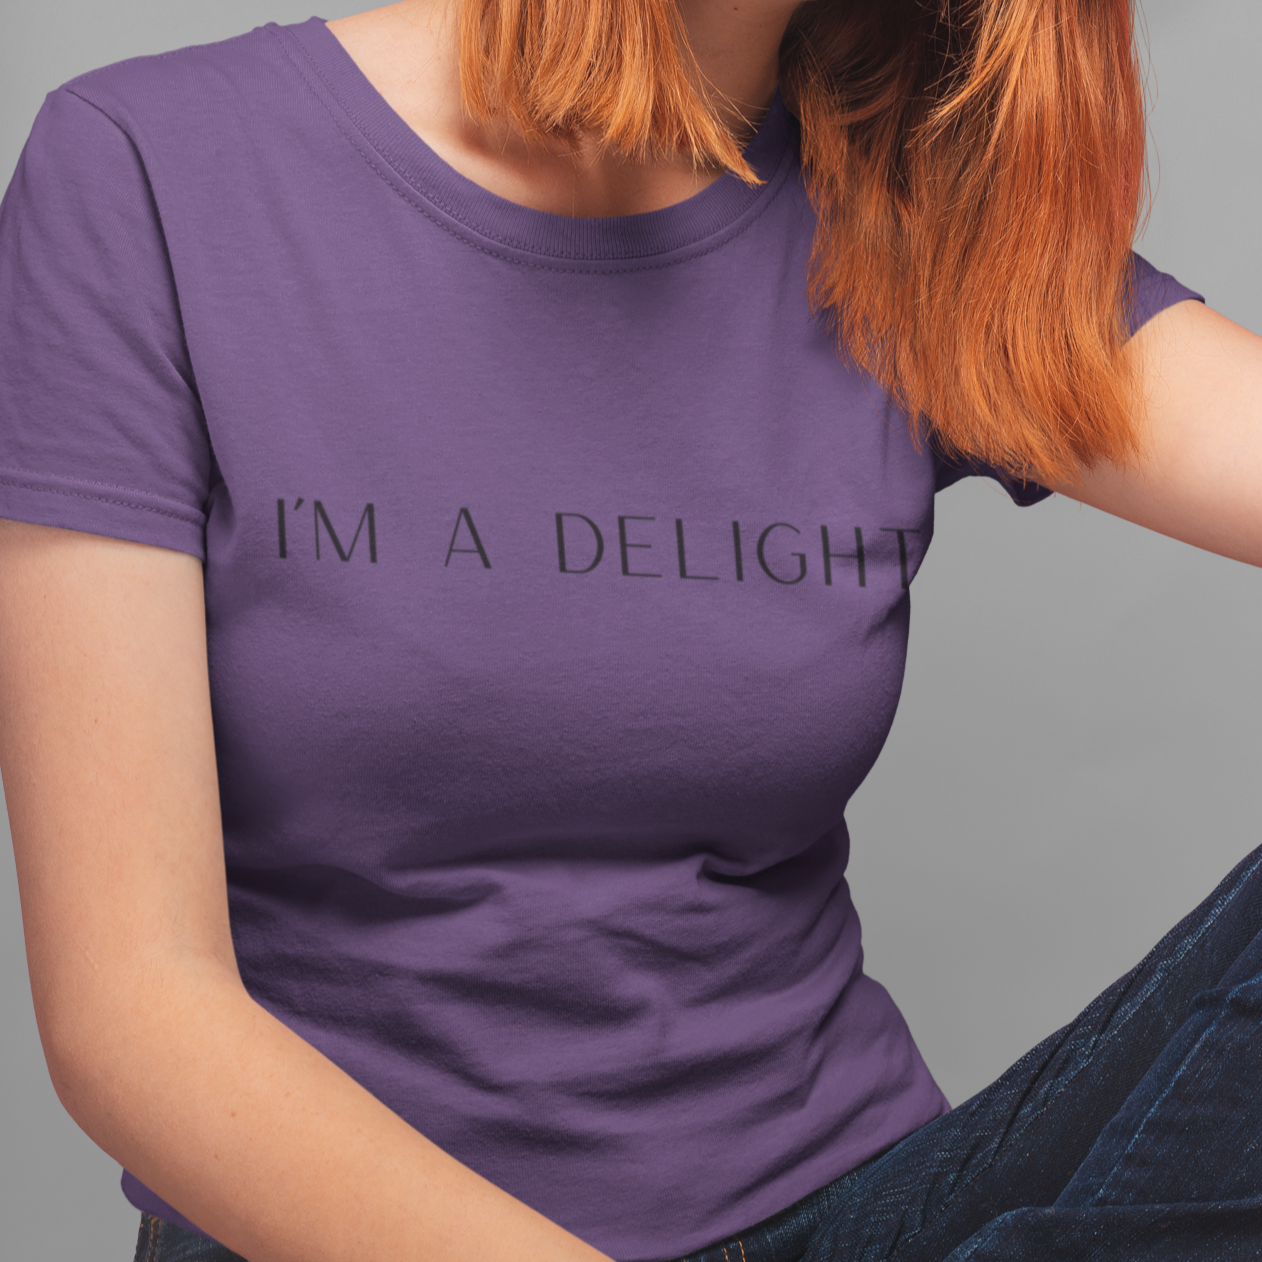 im-a-delight-white-t-shirt-womens-funny-sarcastic-mockup-of-a-thoughtful-pretty-girl